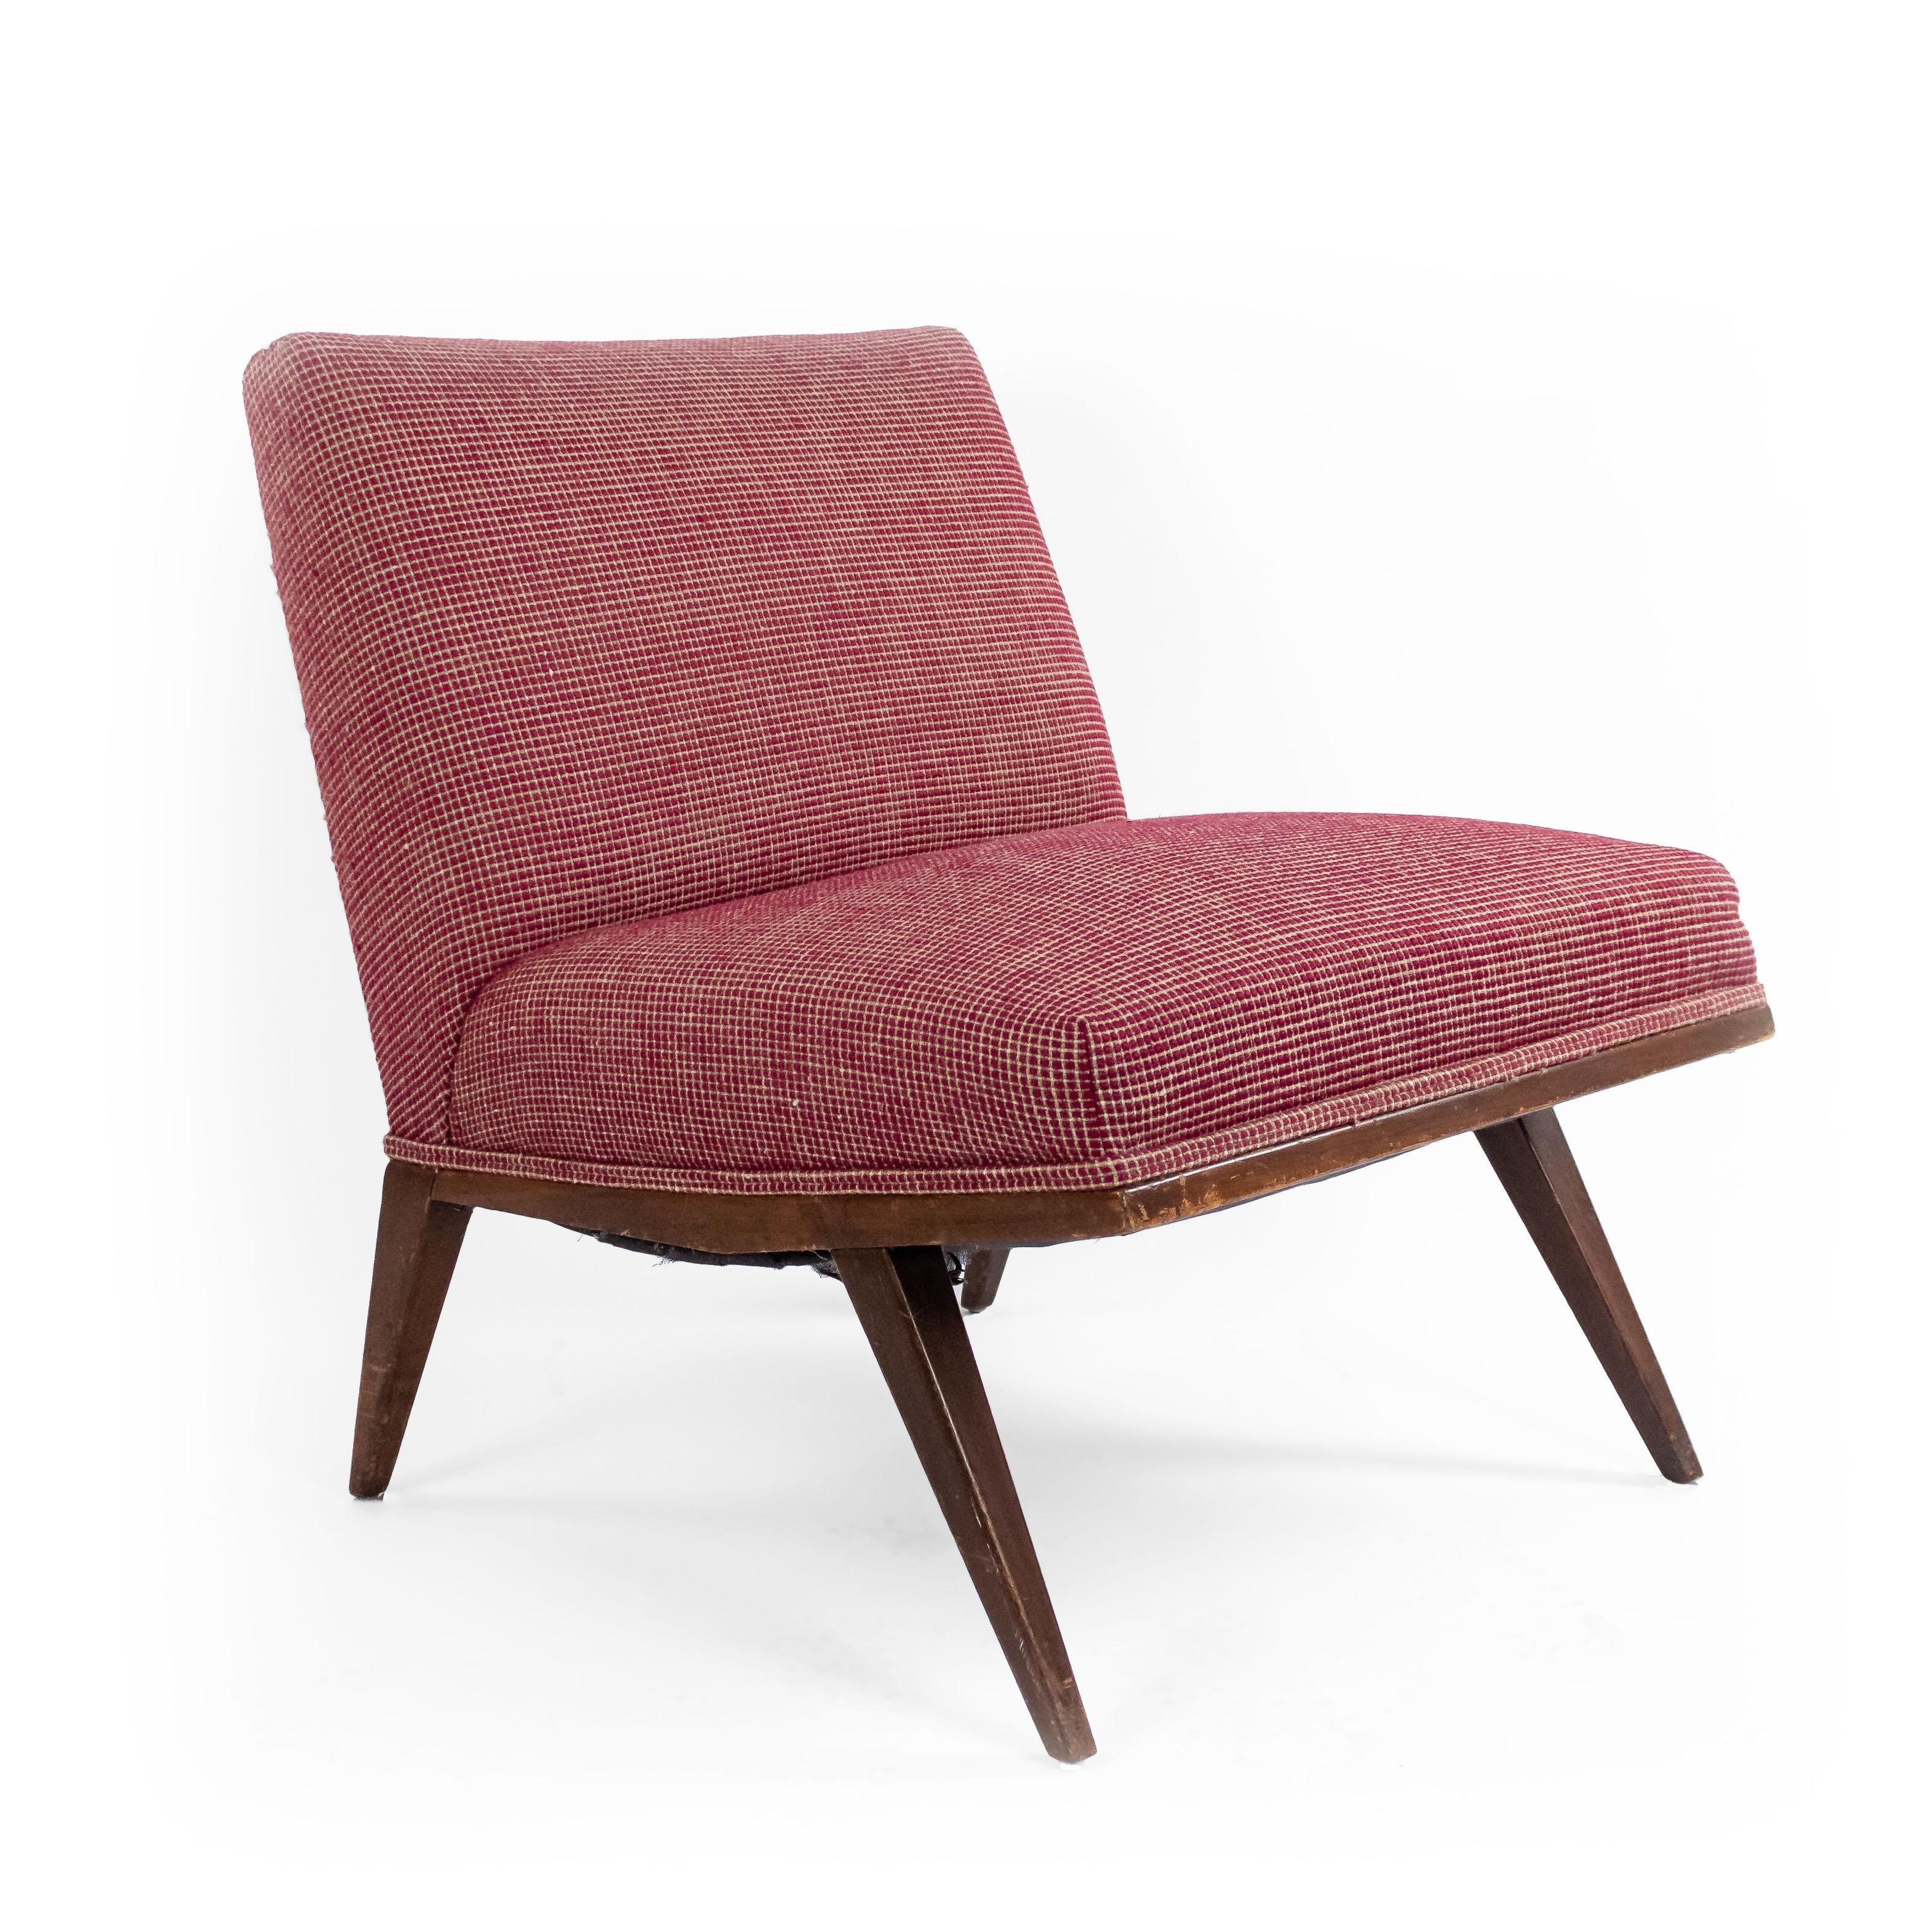 Pair of Mid-Century slipper chairs with red and beige geometrically patterned upholstery and tapered walnut legs